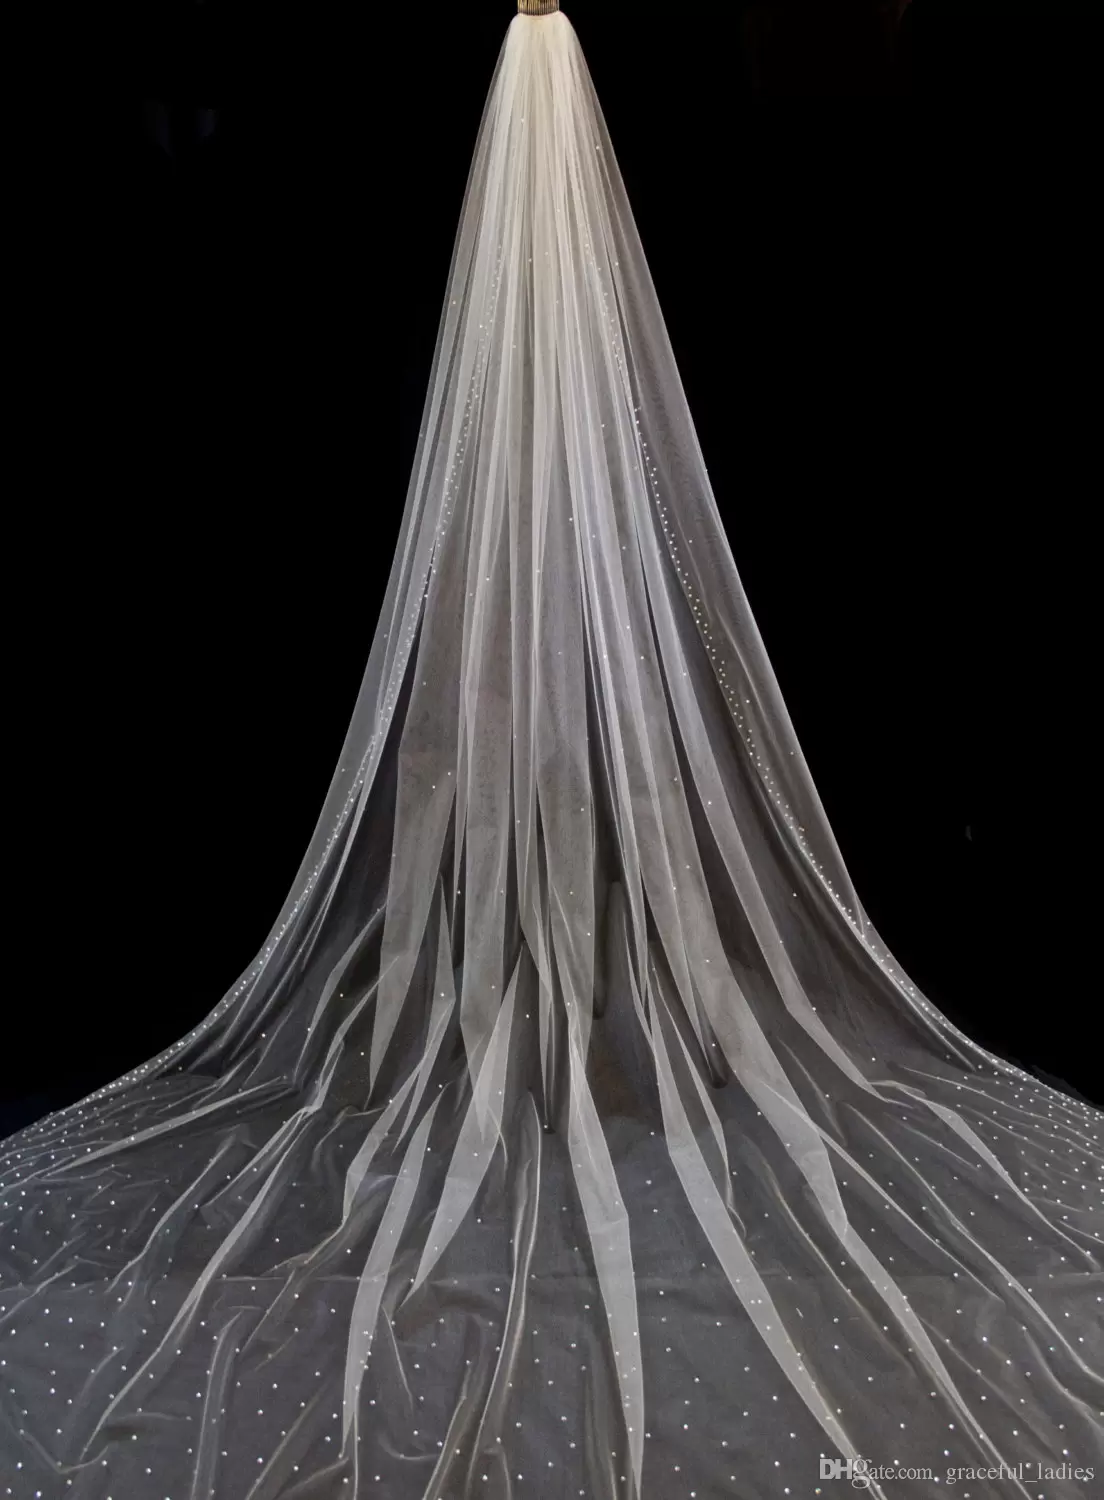 Royal Cathedral Length Bridal Veil with Crystal Edge and Scattered Crystals Bridal Accessories Veils 130 inch Wedding Veil